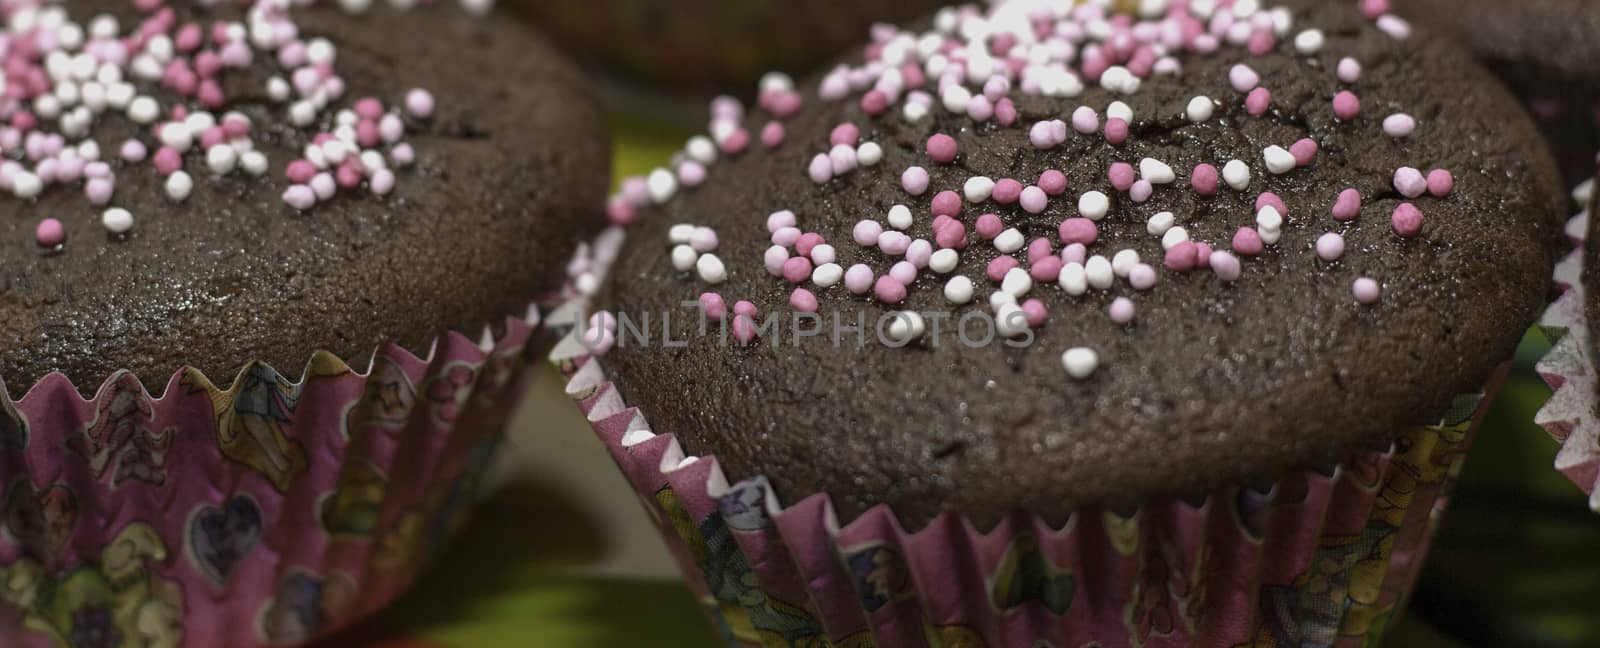 Muffins In Pink Forms For Baking . by gstalker